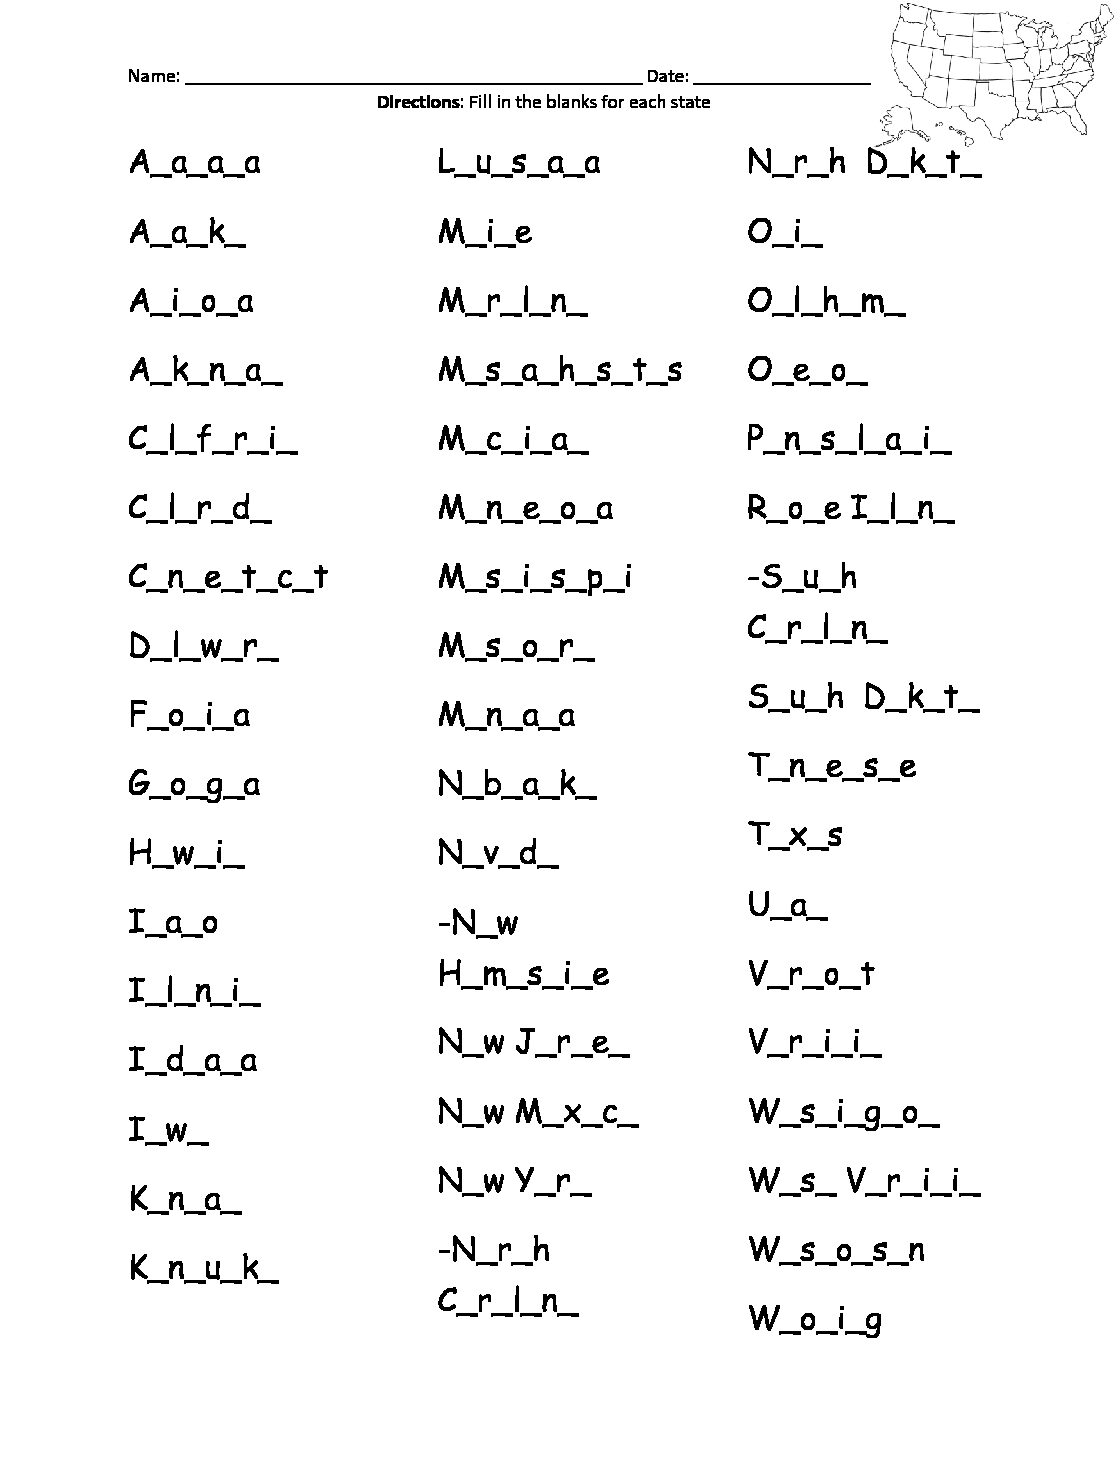 50 States of the USA List of States Fill in the Blank Letters Printable Activity